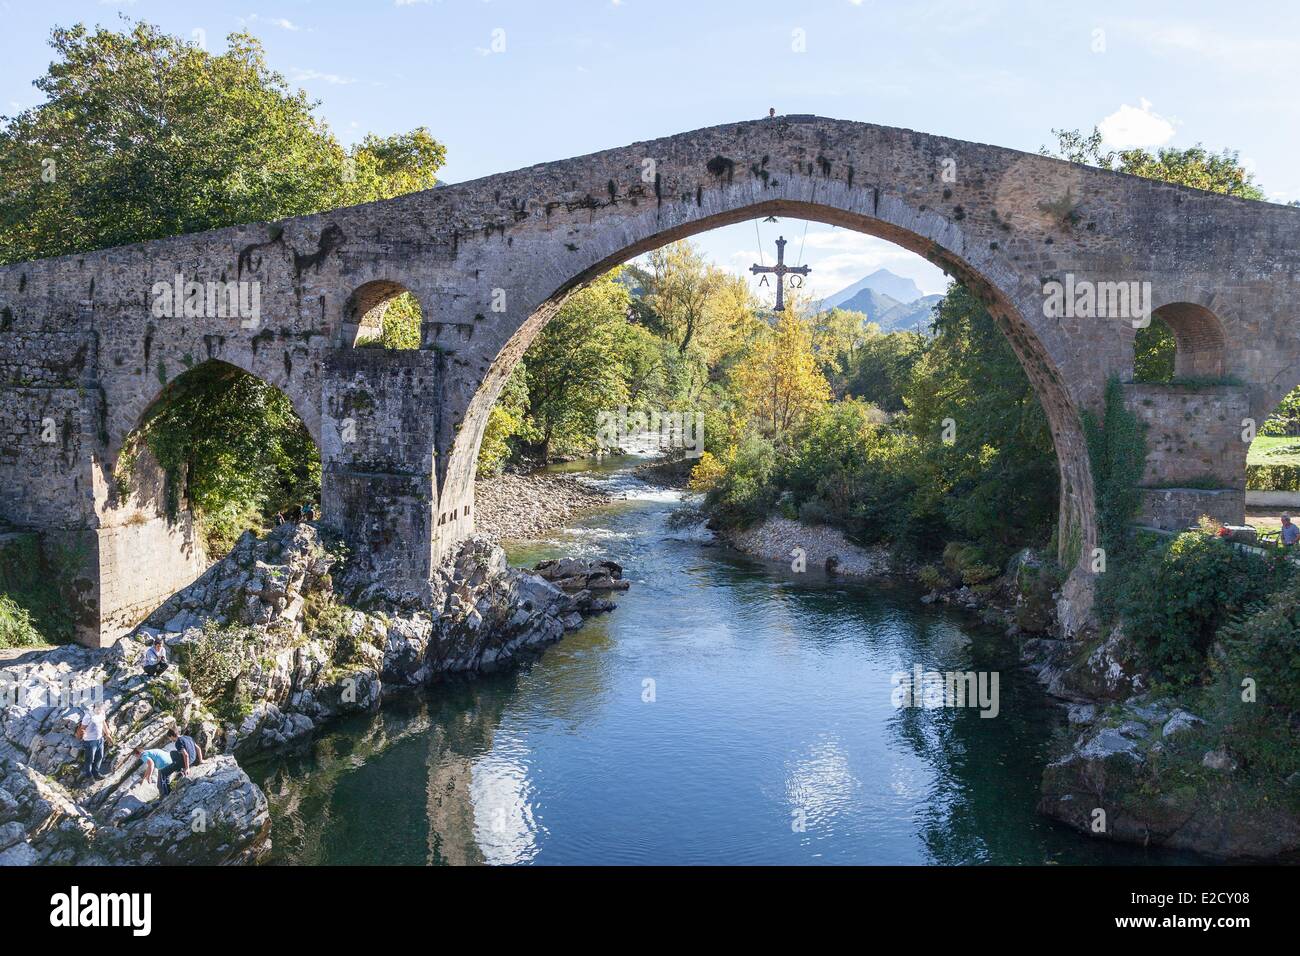 Spain province of Asturias Cangas de Onis Picos de Europa national Park the Roman bridge over the Sella and the Cross of Victory Stock Photo